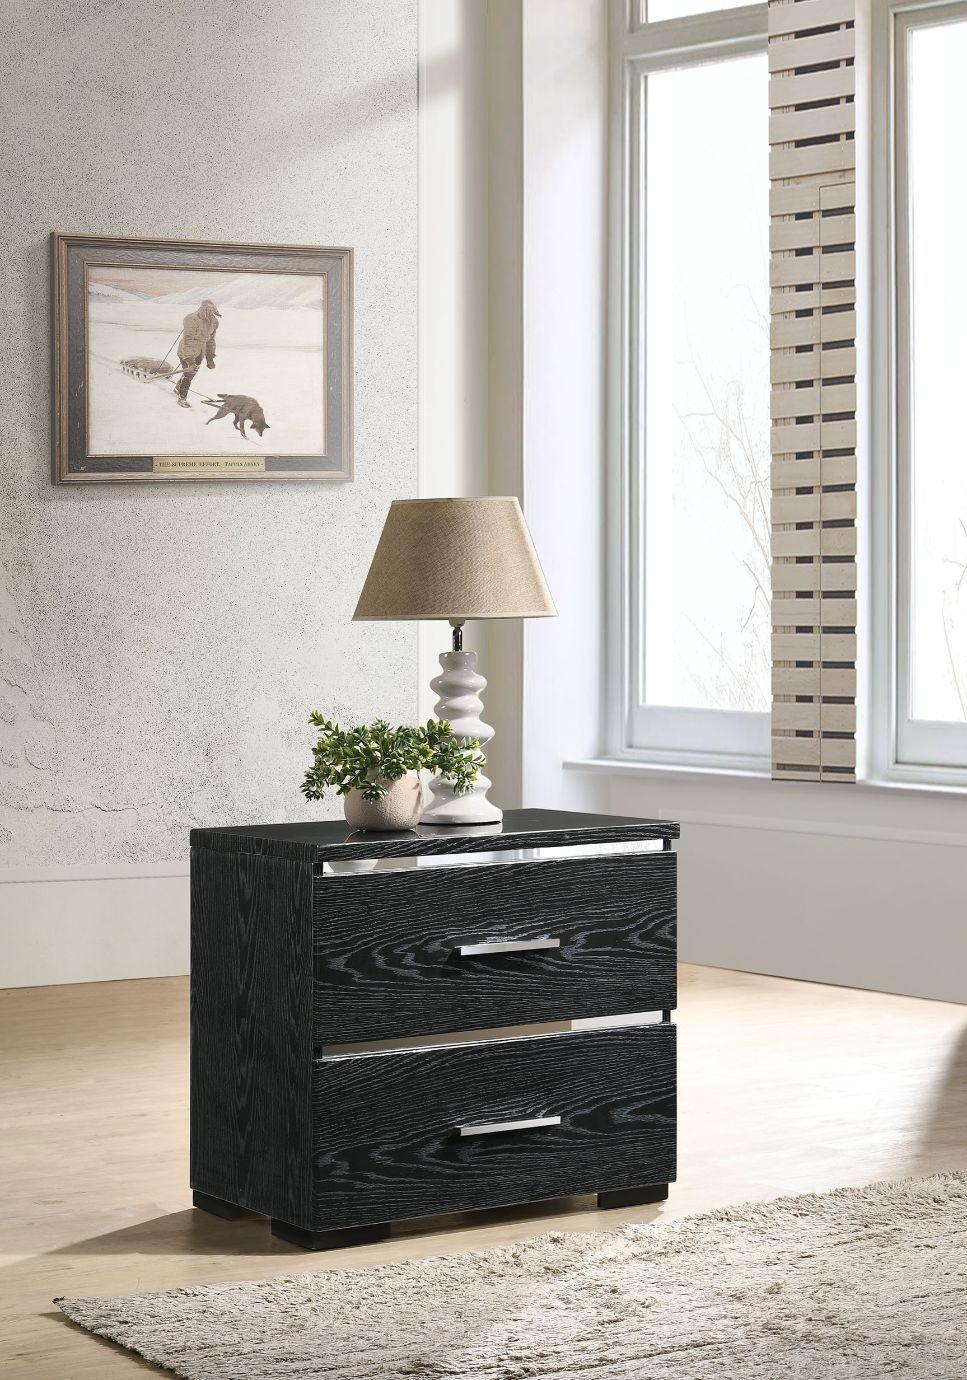 ACME - Laleh - Accent Table - Black (High Gloss) - 5th Avenue Furniture